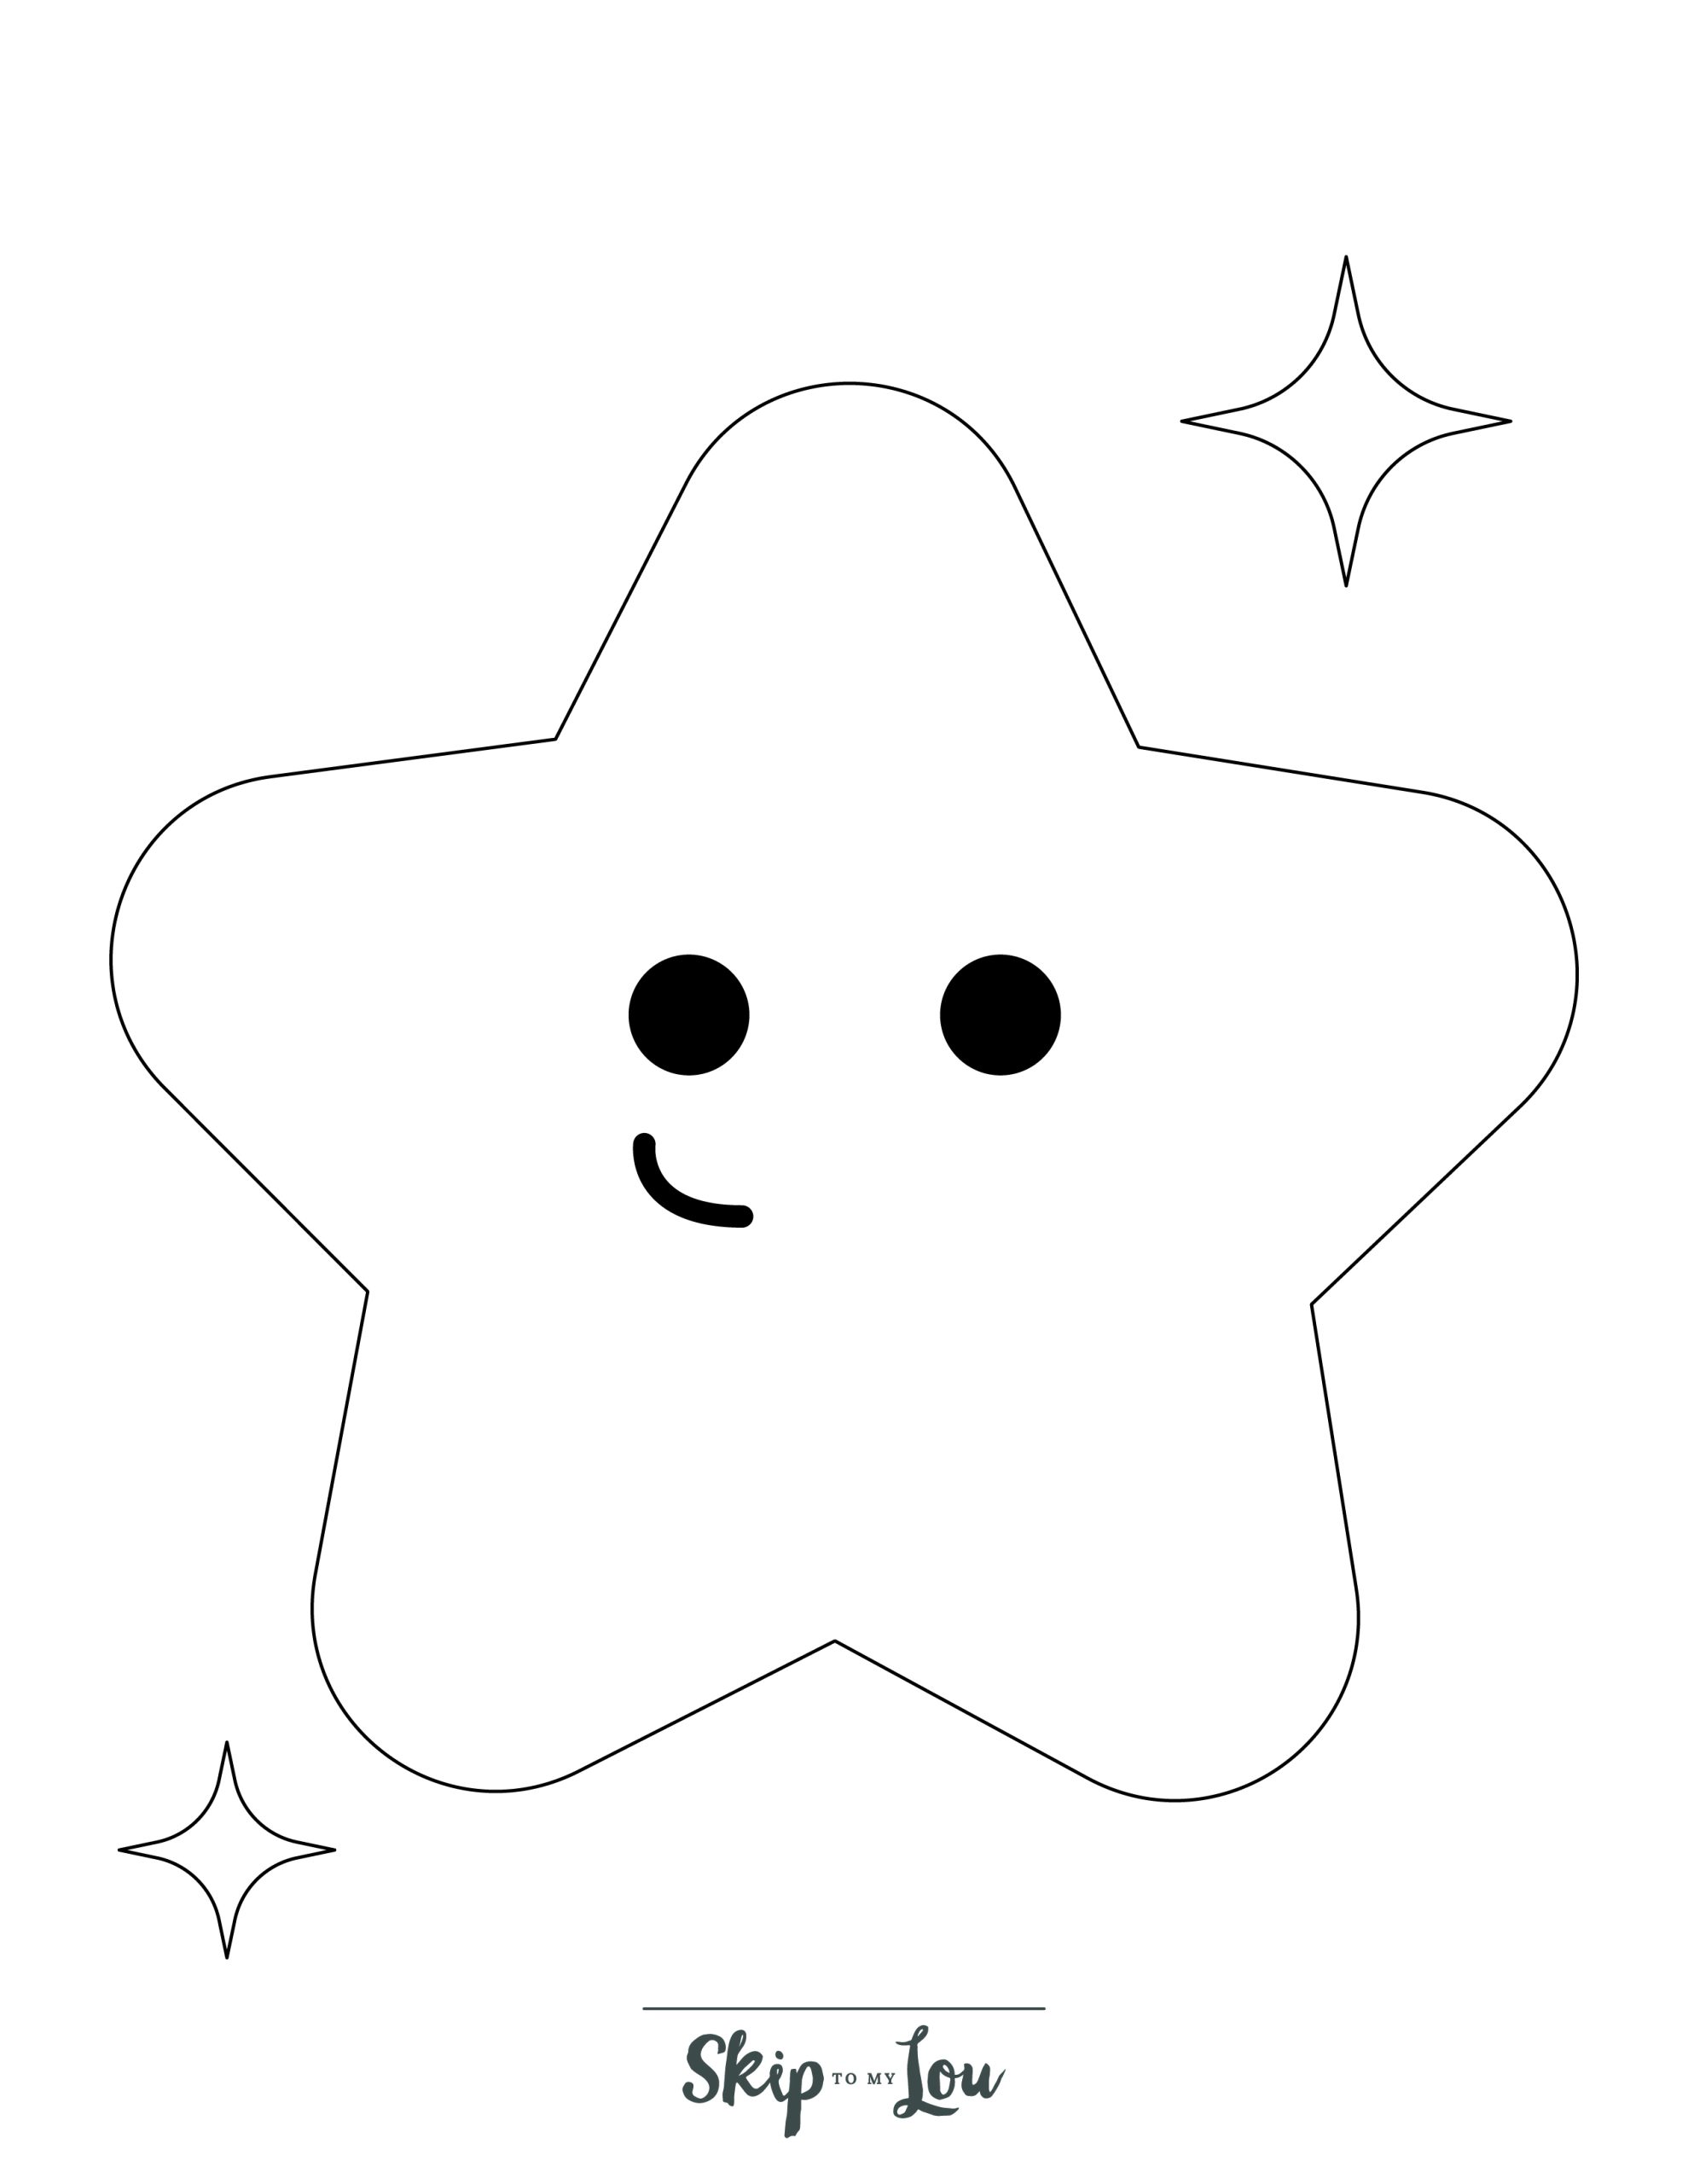 Star Coloring Page 3 - Line drawing of a little star with a face